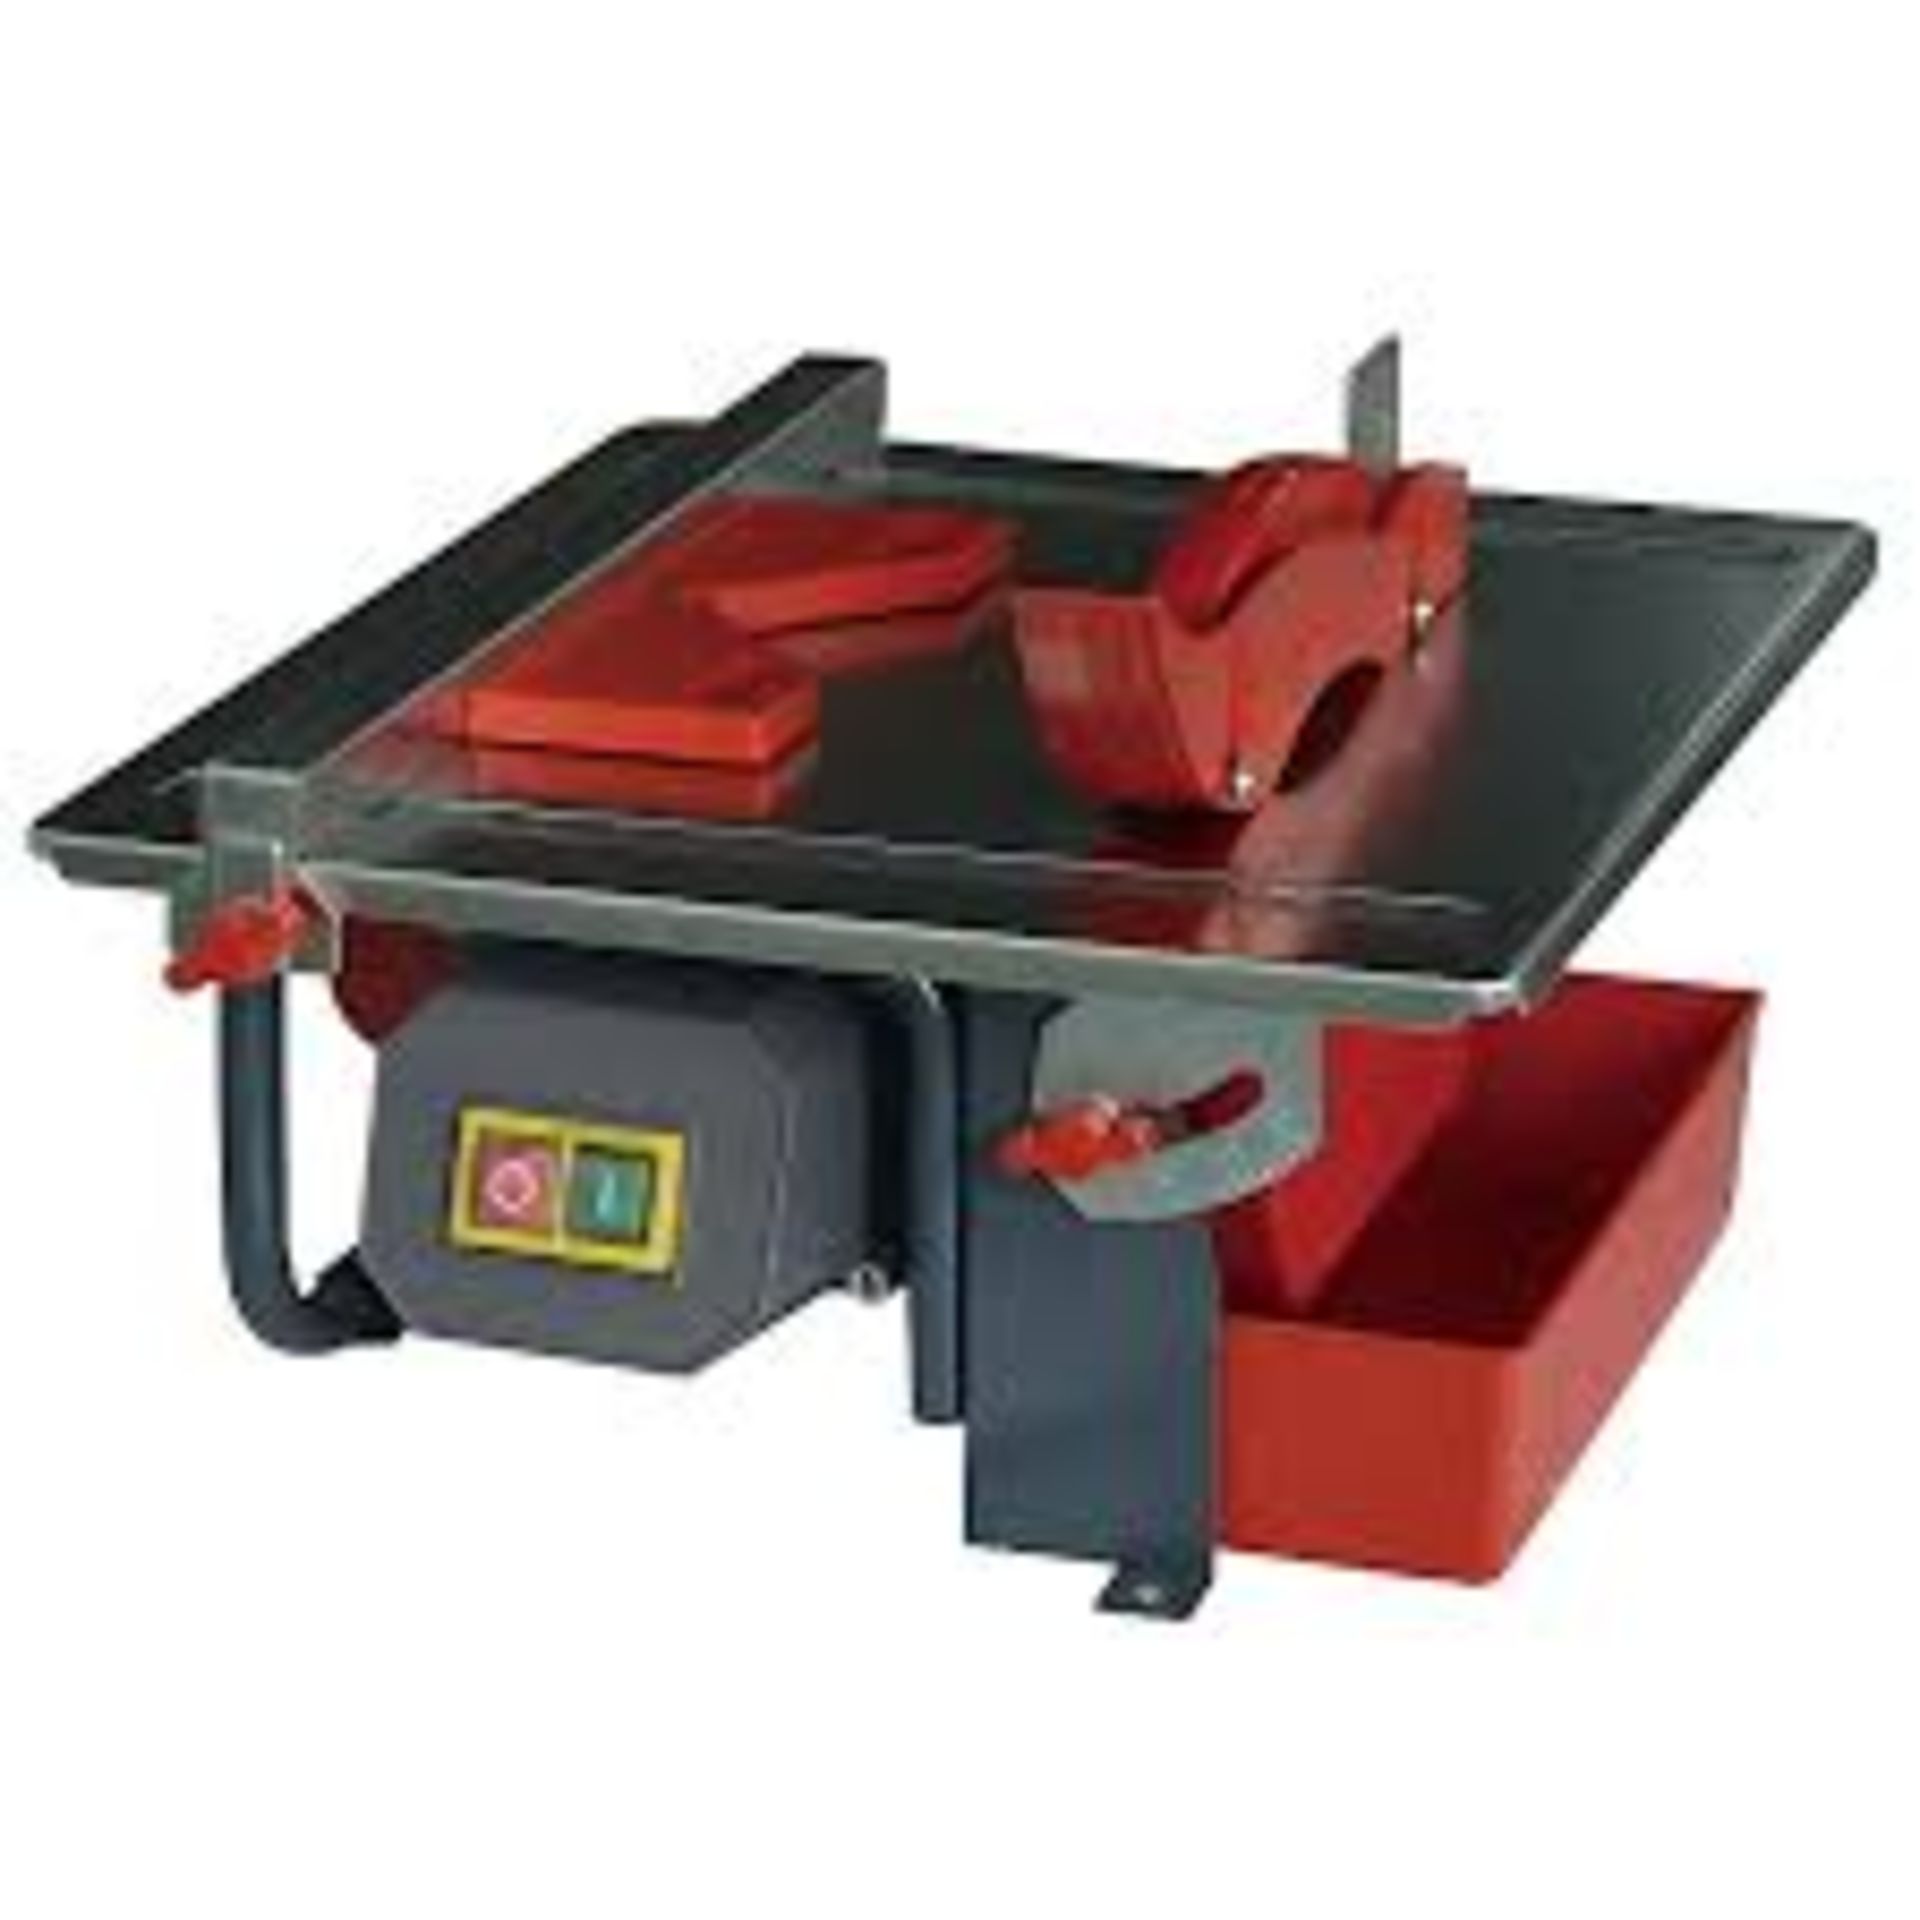 Performance Power 450W 230-240V Corded Tile cutter PTC450E. - S2. Suitable for cutting various